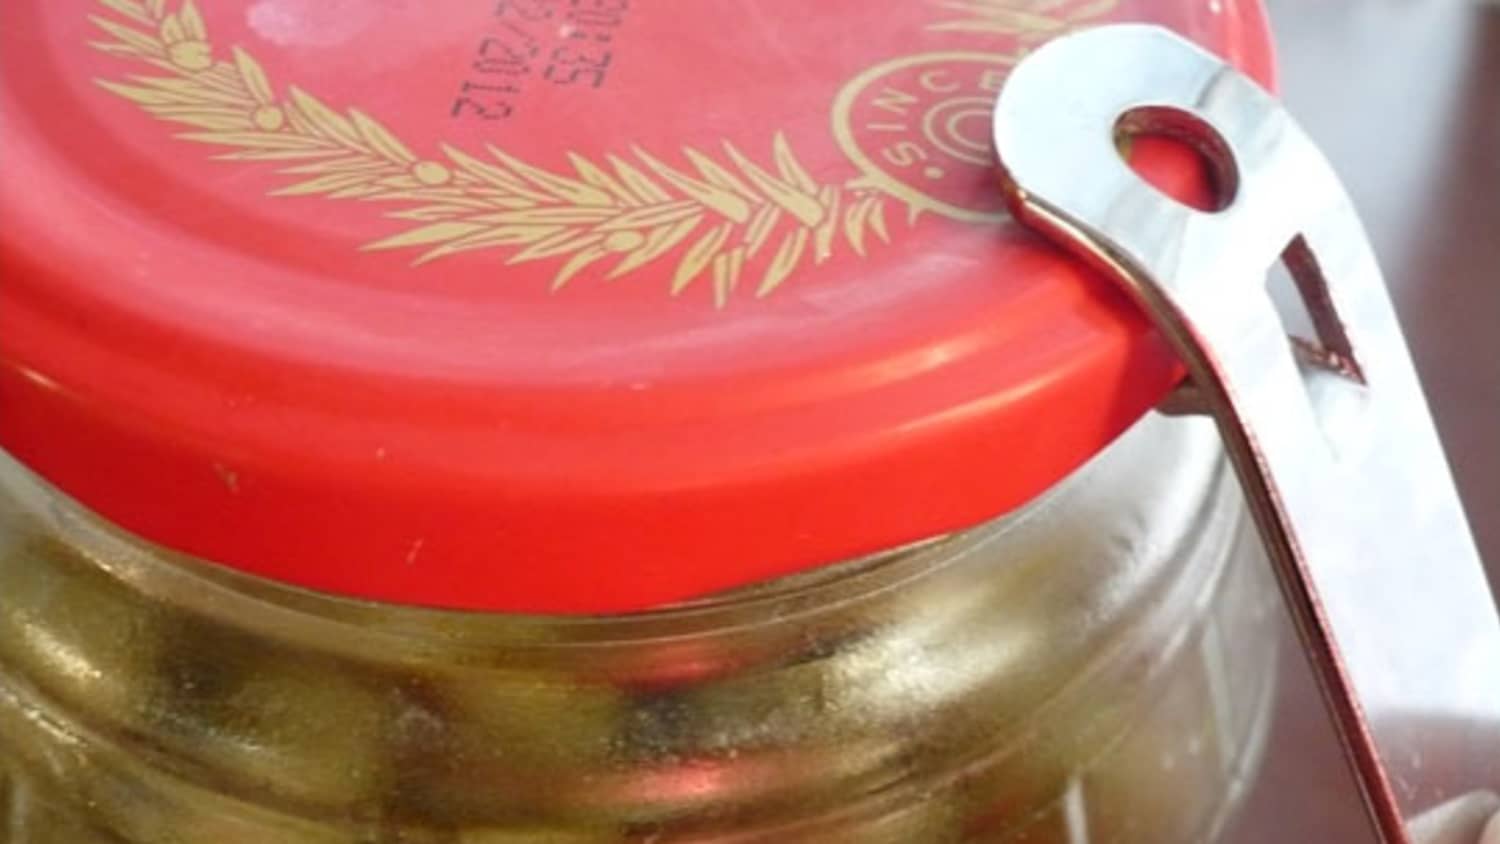 Hack to get stuck lid off a jar — with just a spoon — goes viral